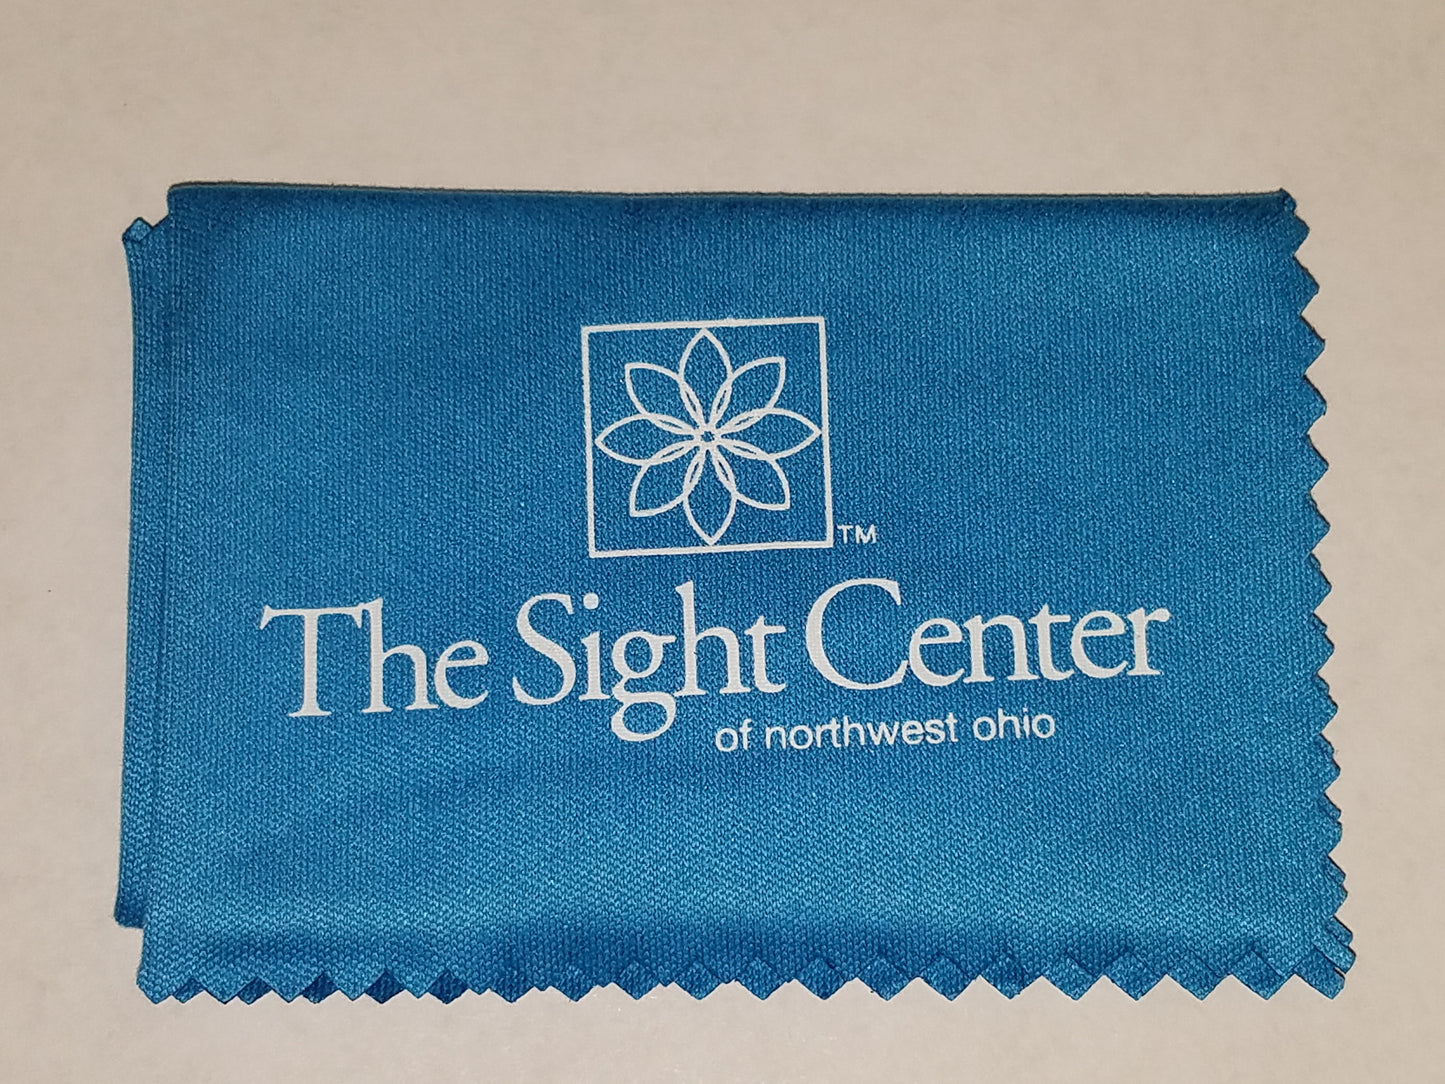 A blue lens cleaning cloth that features the Sight Center of Northest Ohio's logo